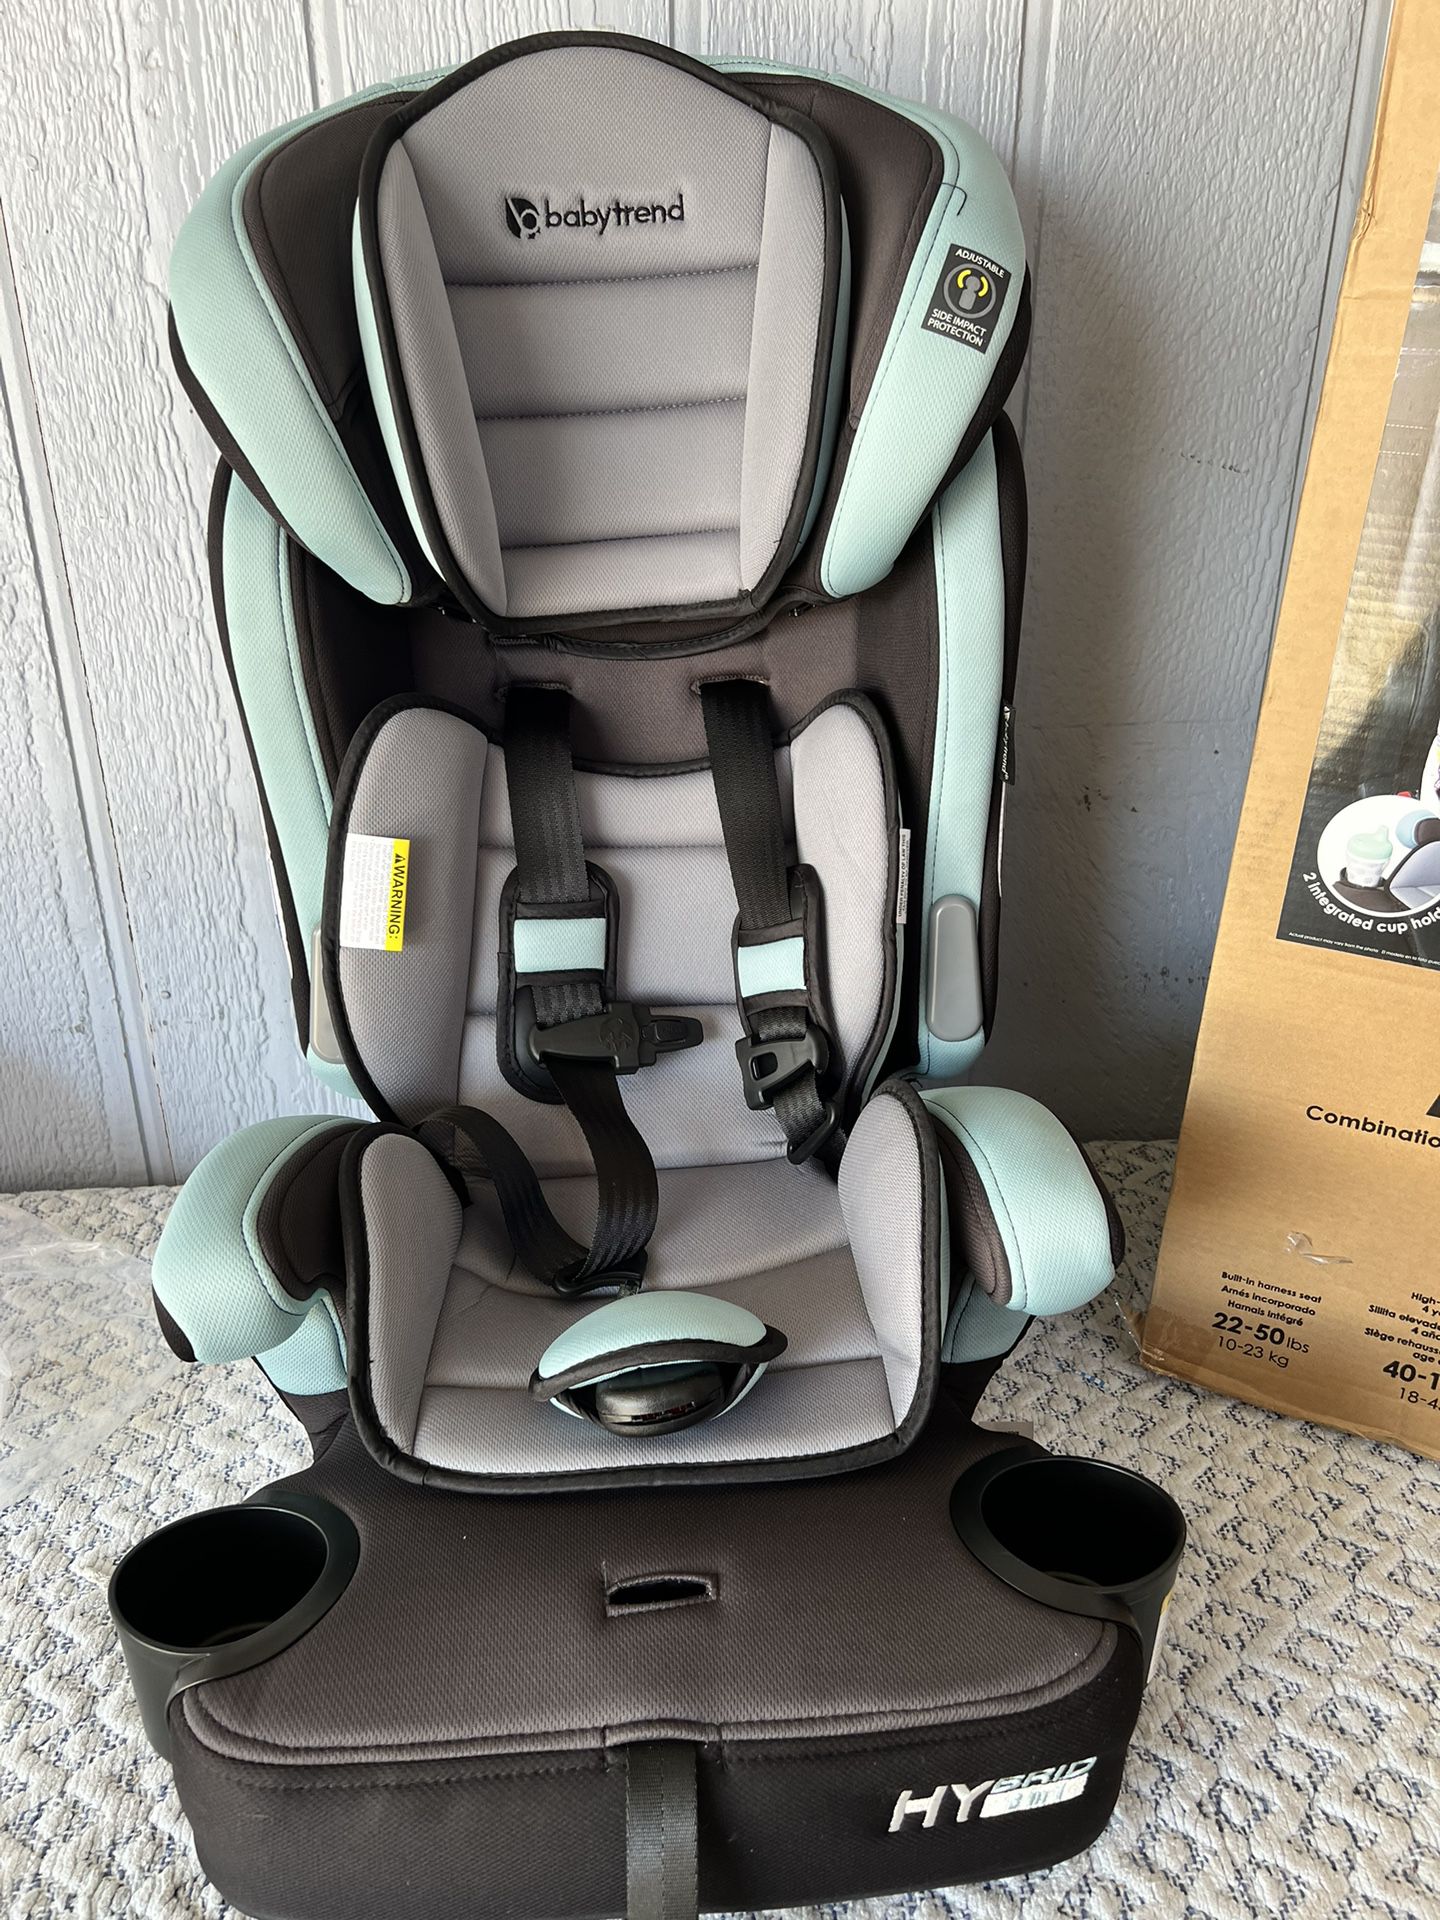 New Baby Trend Hybrid 3-in-1 Combination Booster Seat